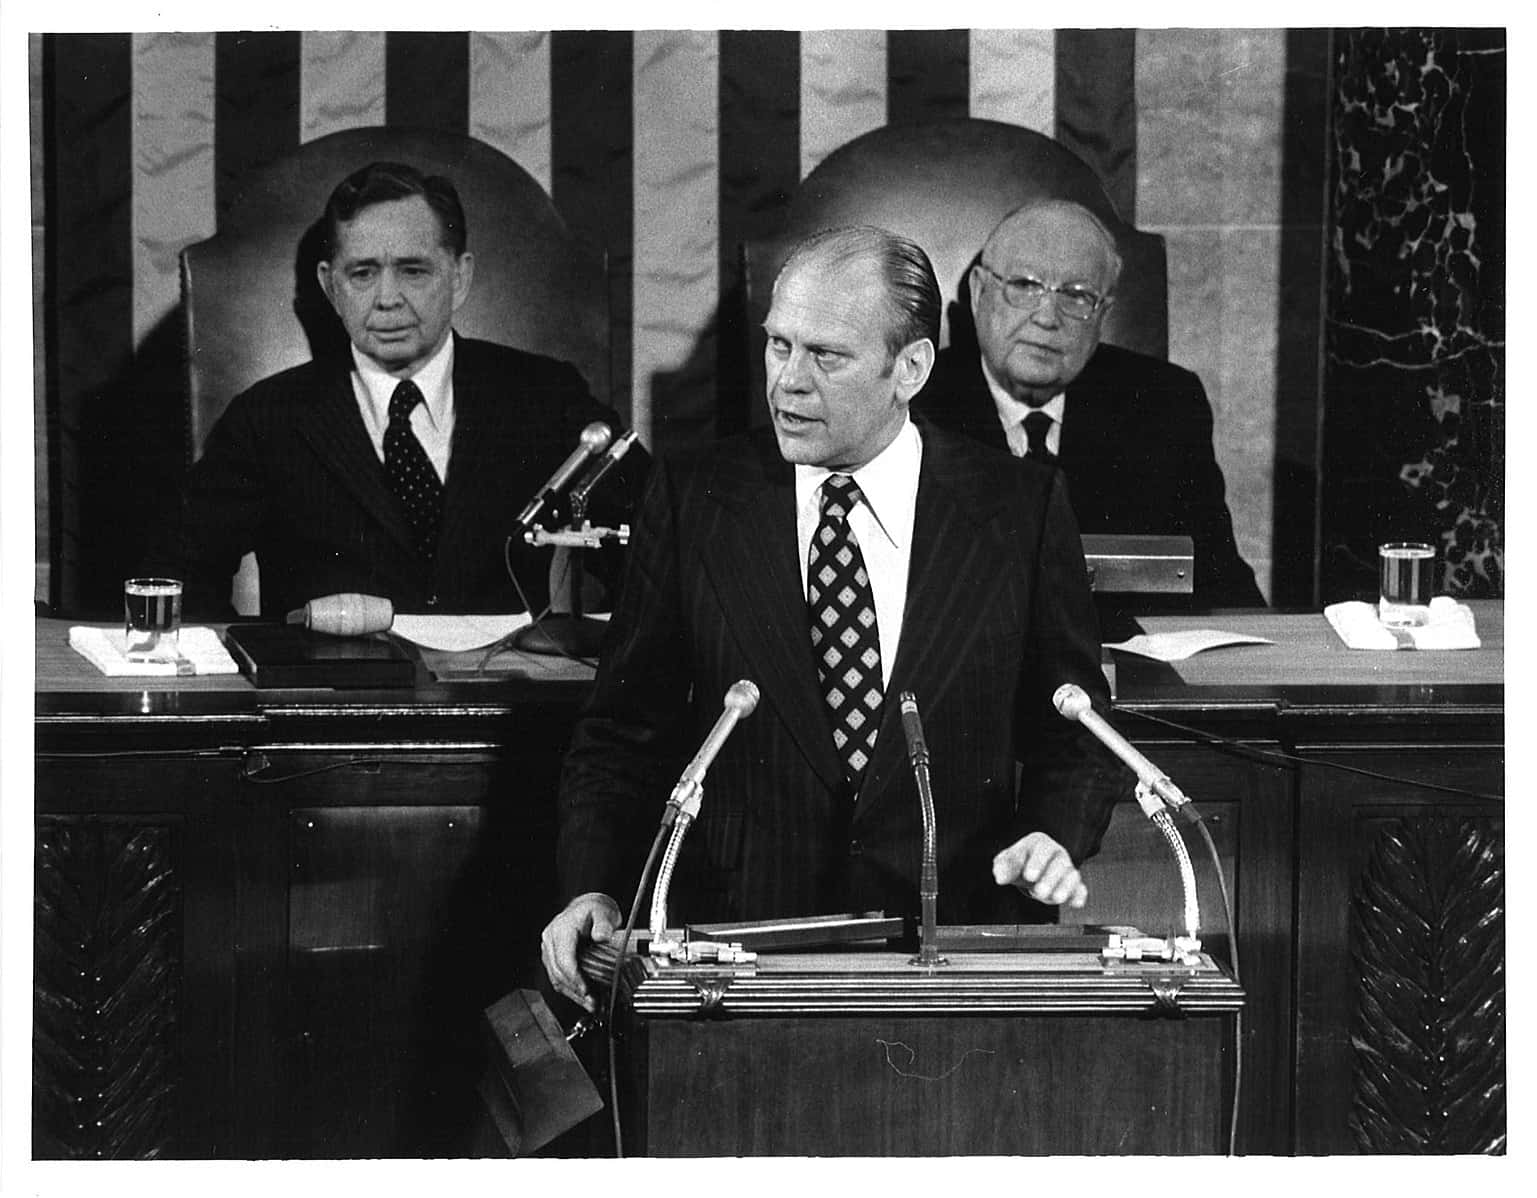 1537px-Inauguration_of_Gerald_Ford_as_Vice-President,_undated